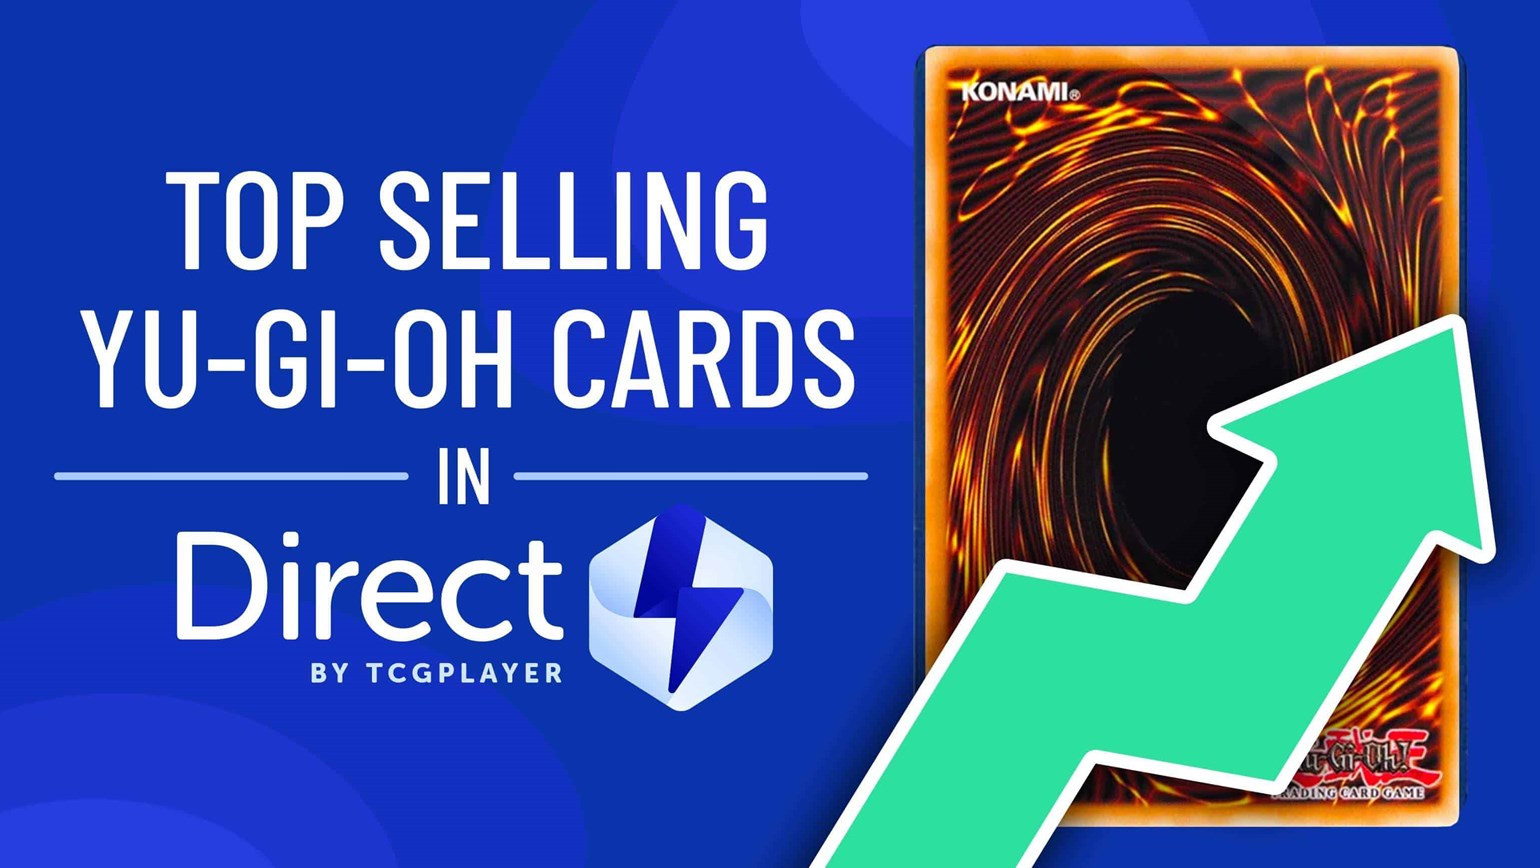 May Top Selling Yu-Gi-Oh! Cards in Direct by TCGplayer